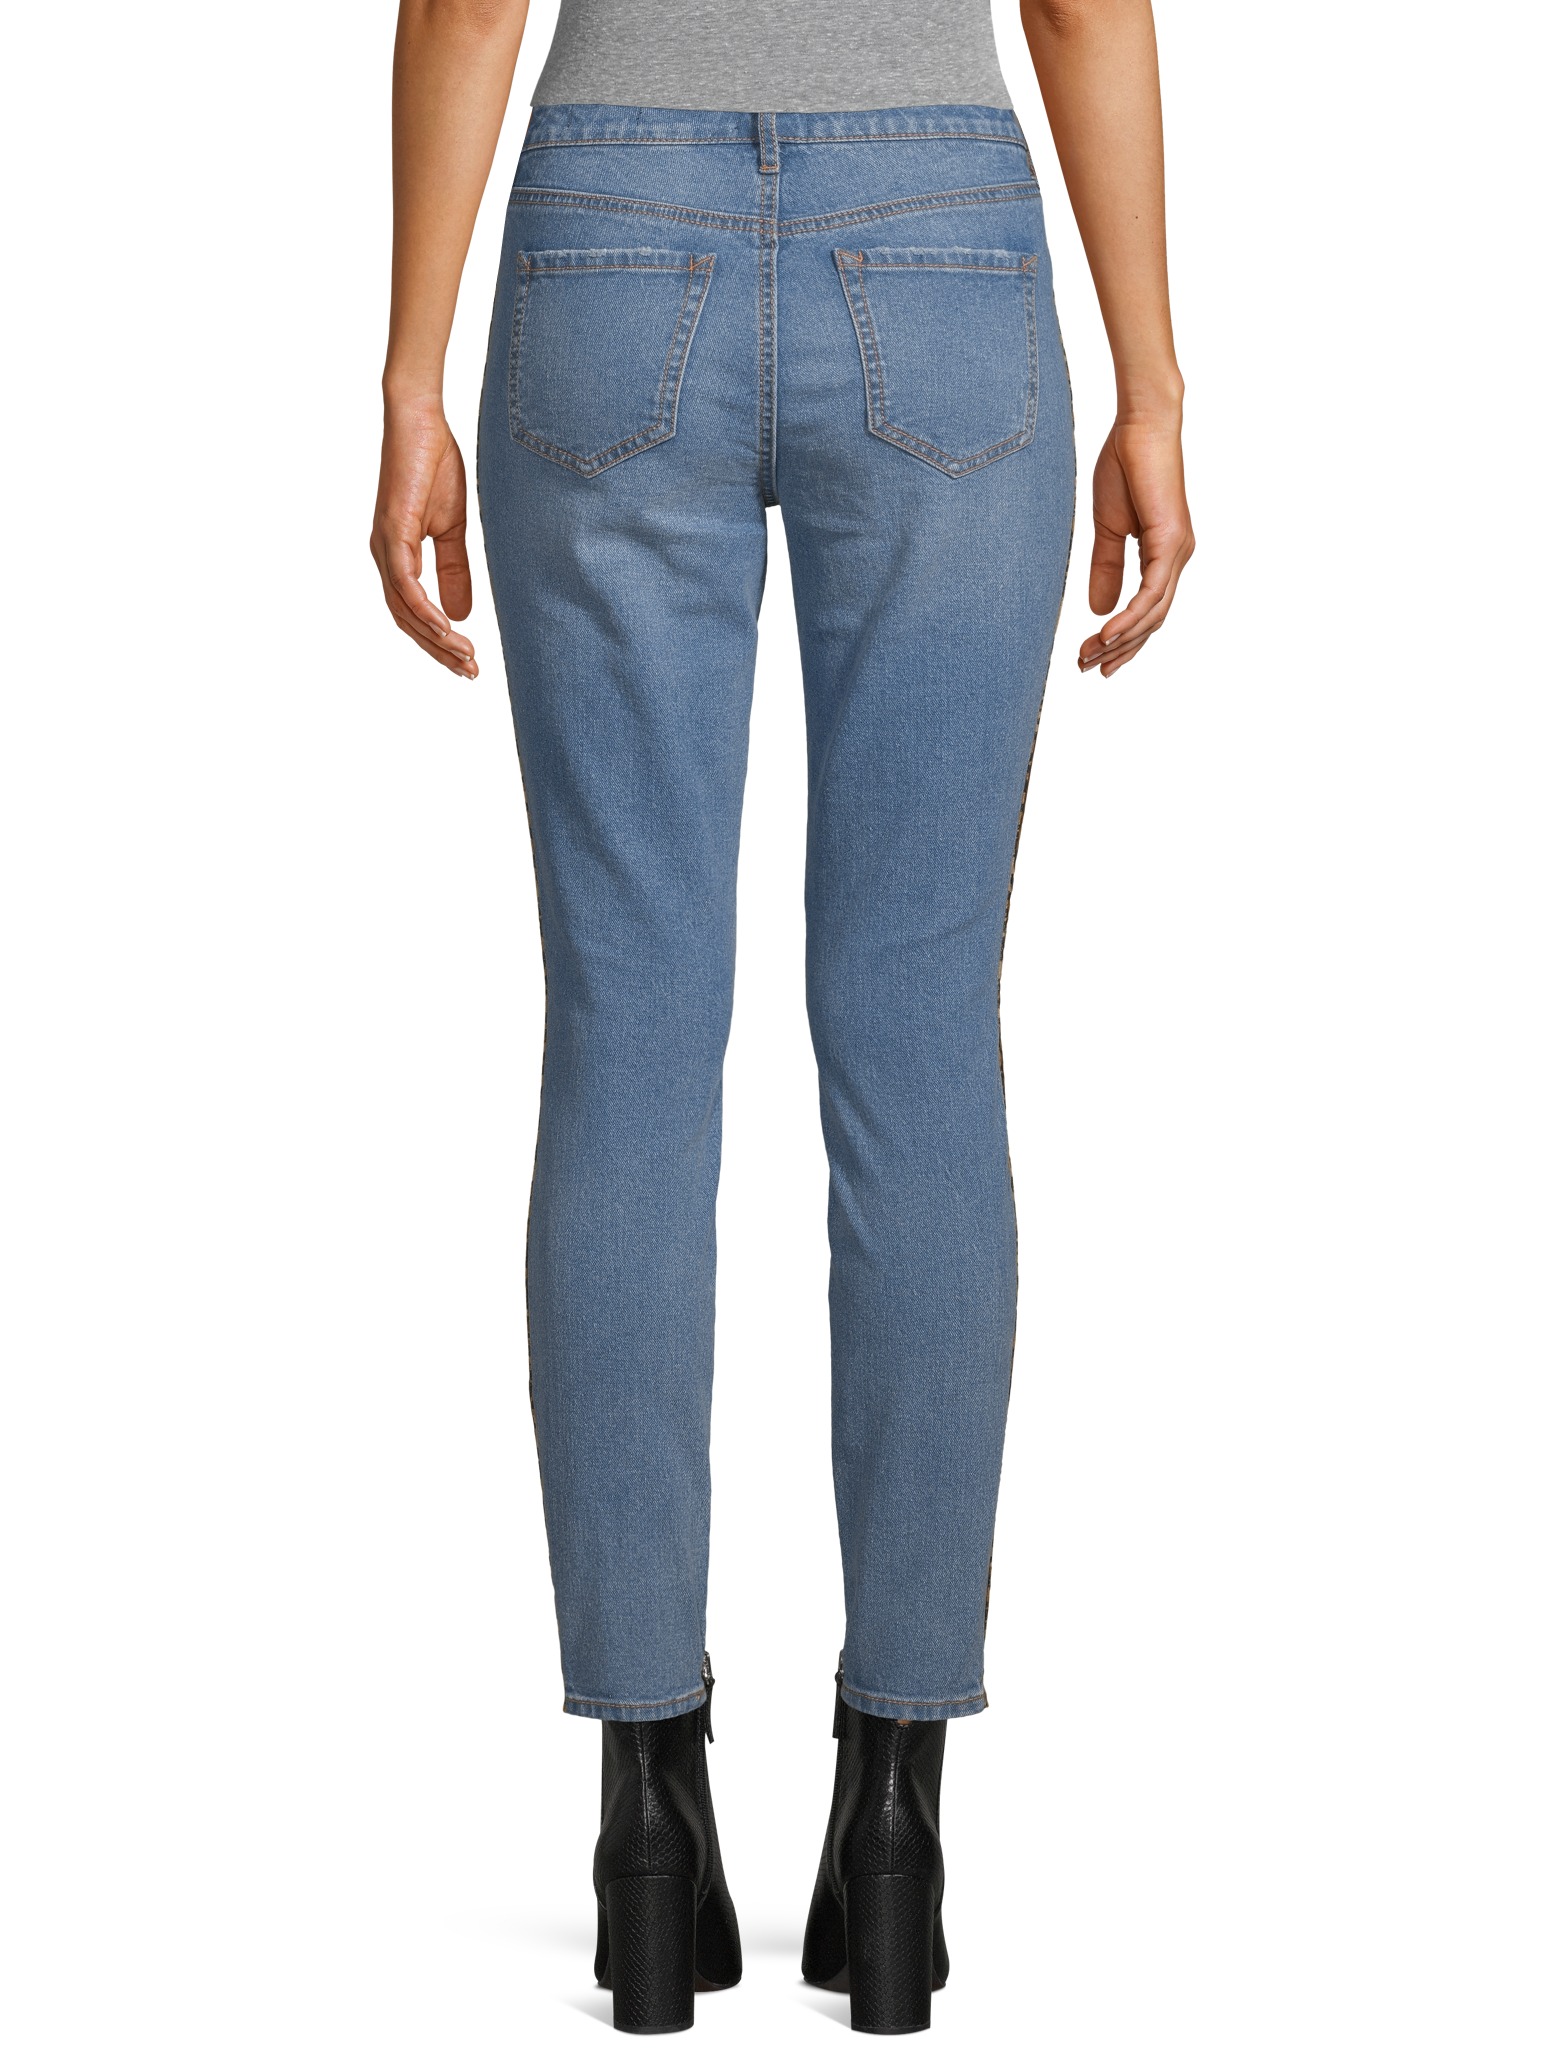 Scoop Women's Skinny Ankle Jeans with Leopard Stripe - image 3 of 7